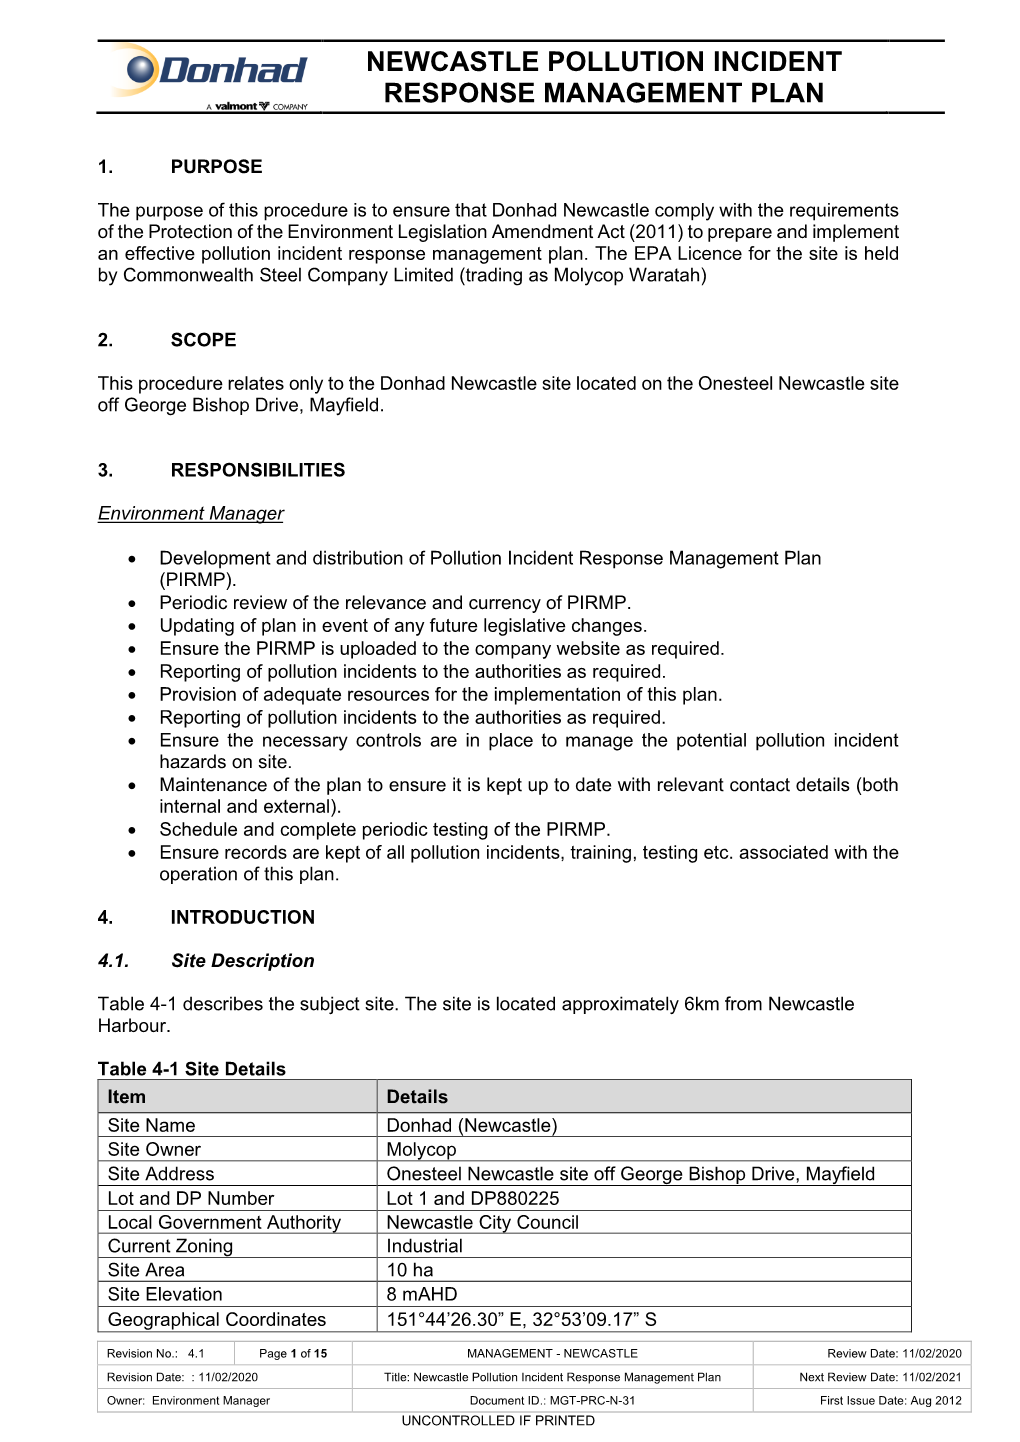 Newcastle Pollution Incident Response Management Plan